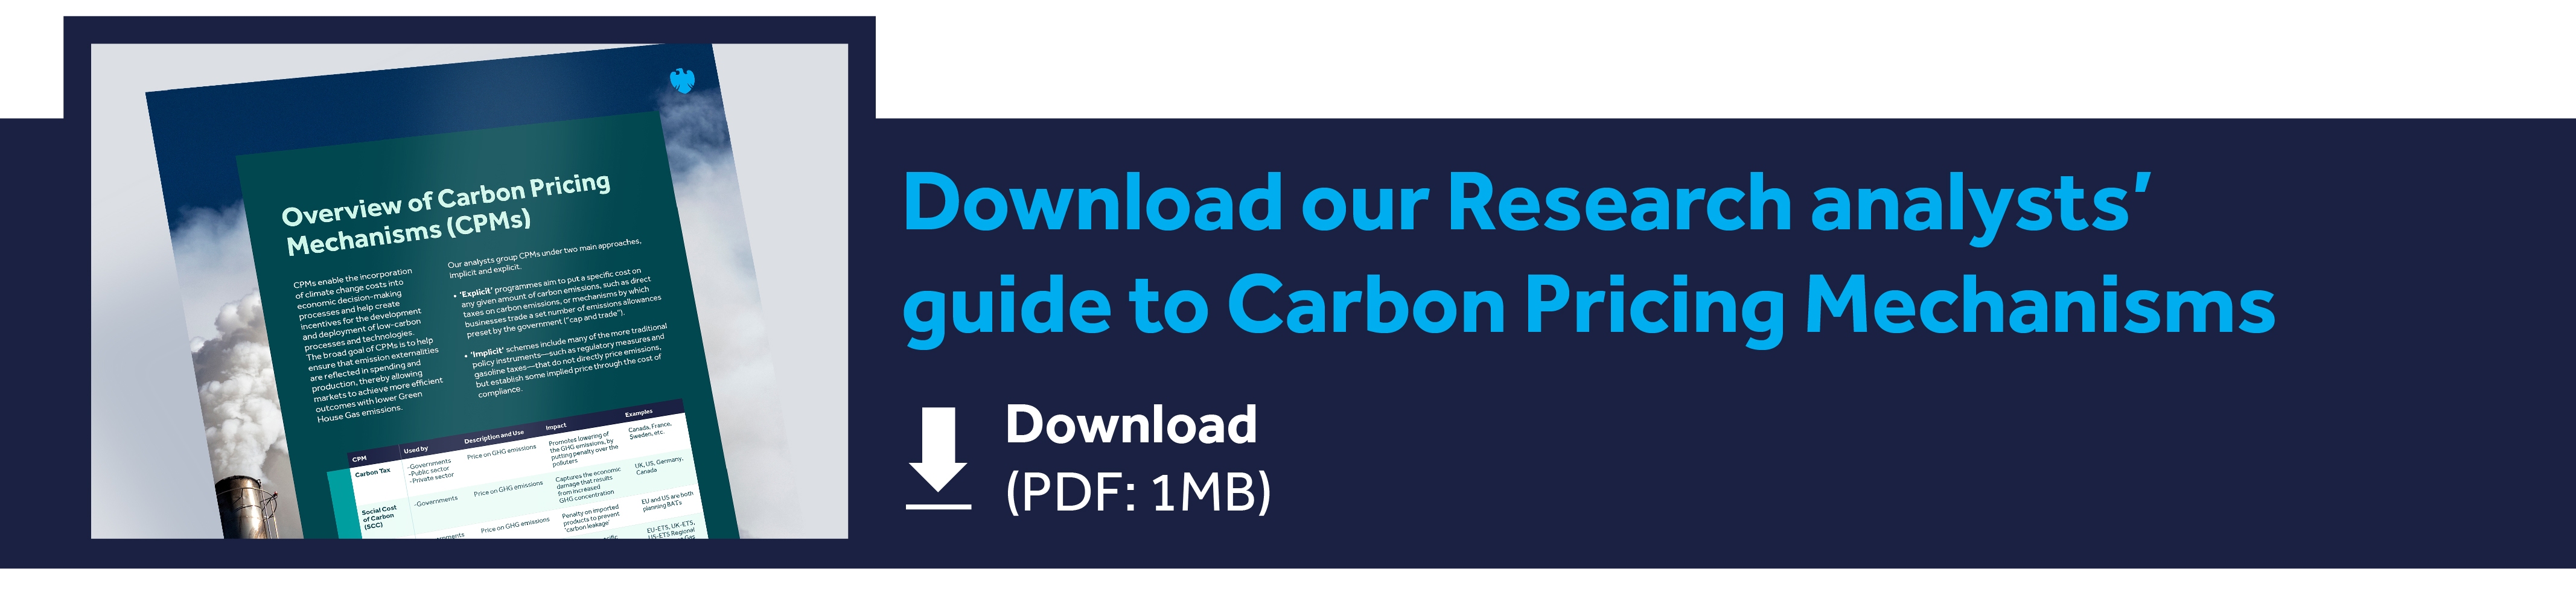 Download our Research analysts' guide to Carbon Pricing Mechanisms